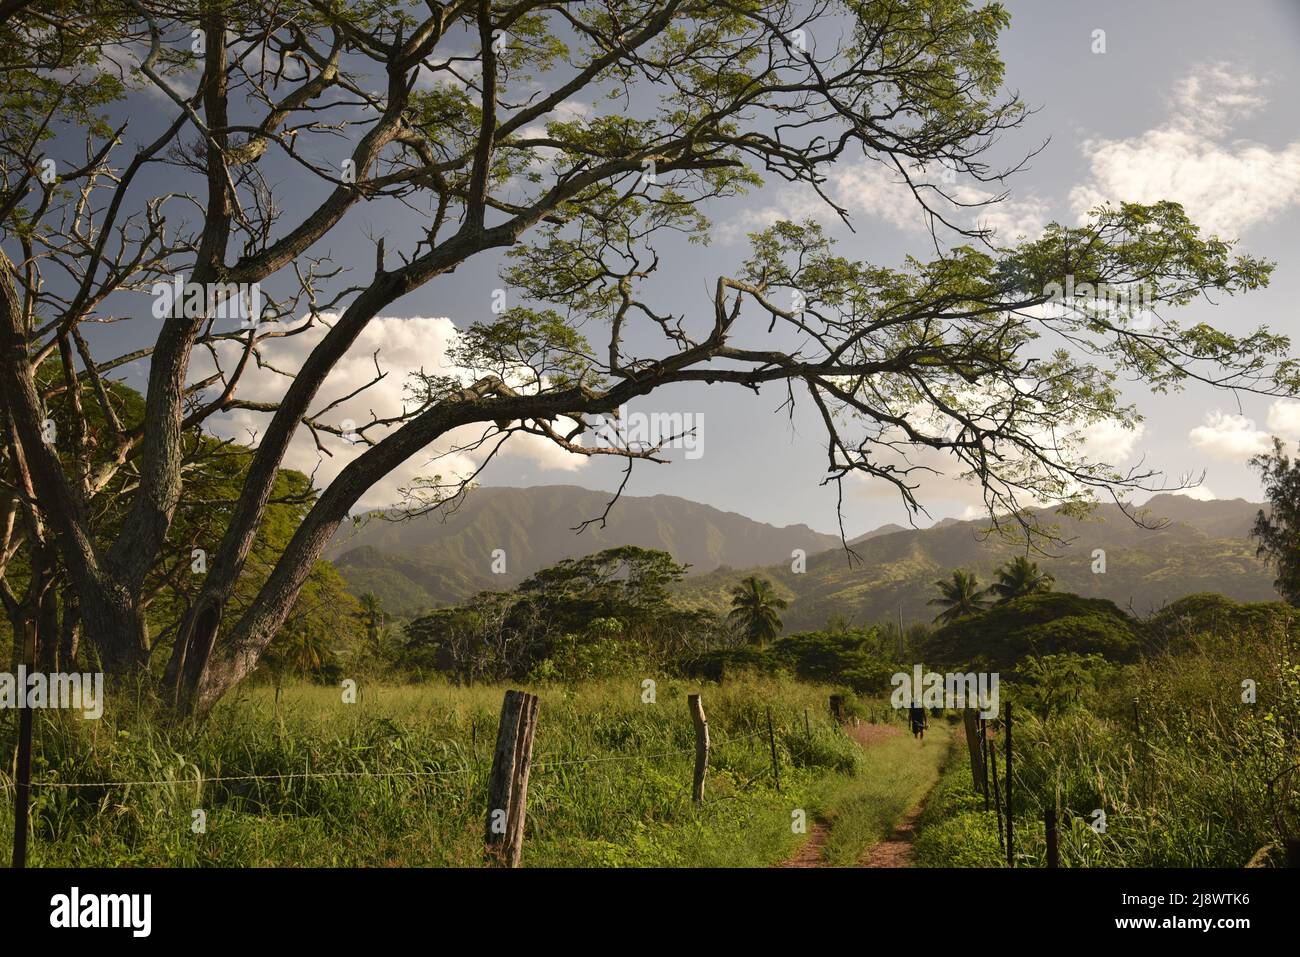 Fisherman walking down sandy pathway lined by fenced-in ranch pasture, Pahole Natural Area Reserve mountains in distance, Mokuleia, Hawaii, USA Stock Photo